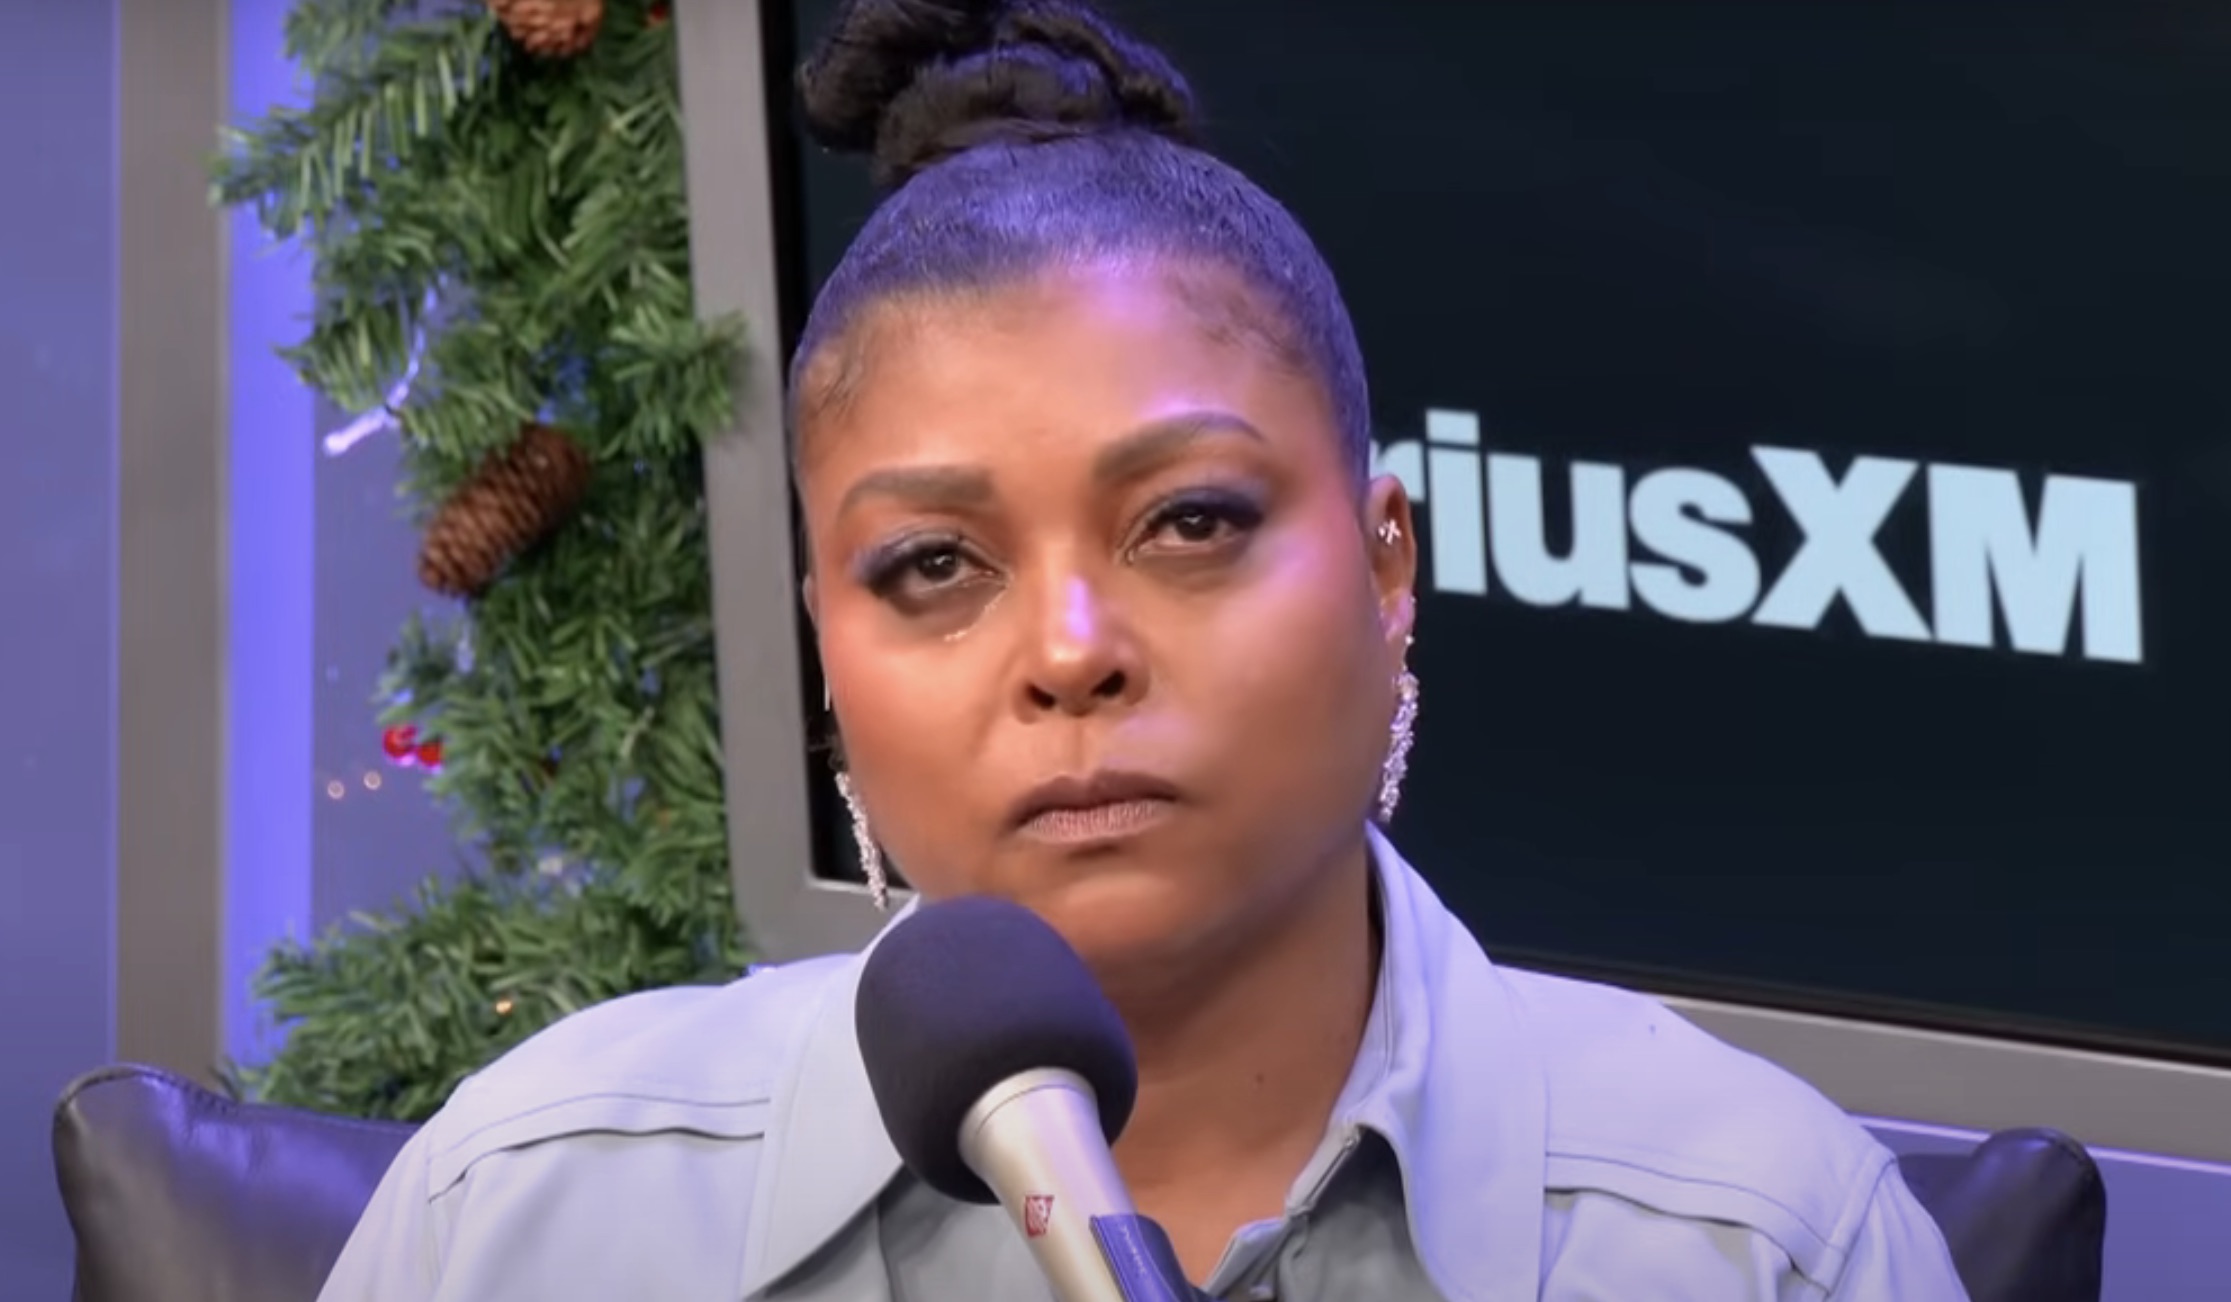 Taraji P. Henson Breaks Down in Tears Over Racial & Gender Pay Gap: “I’m Tired, The Math Ain’t Mathing”